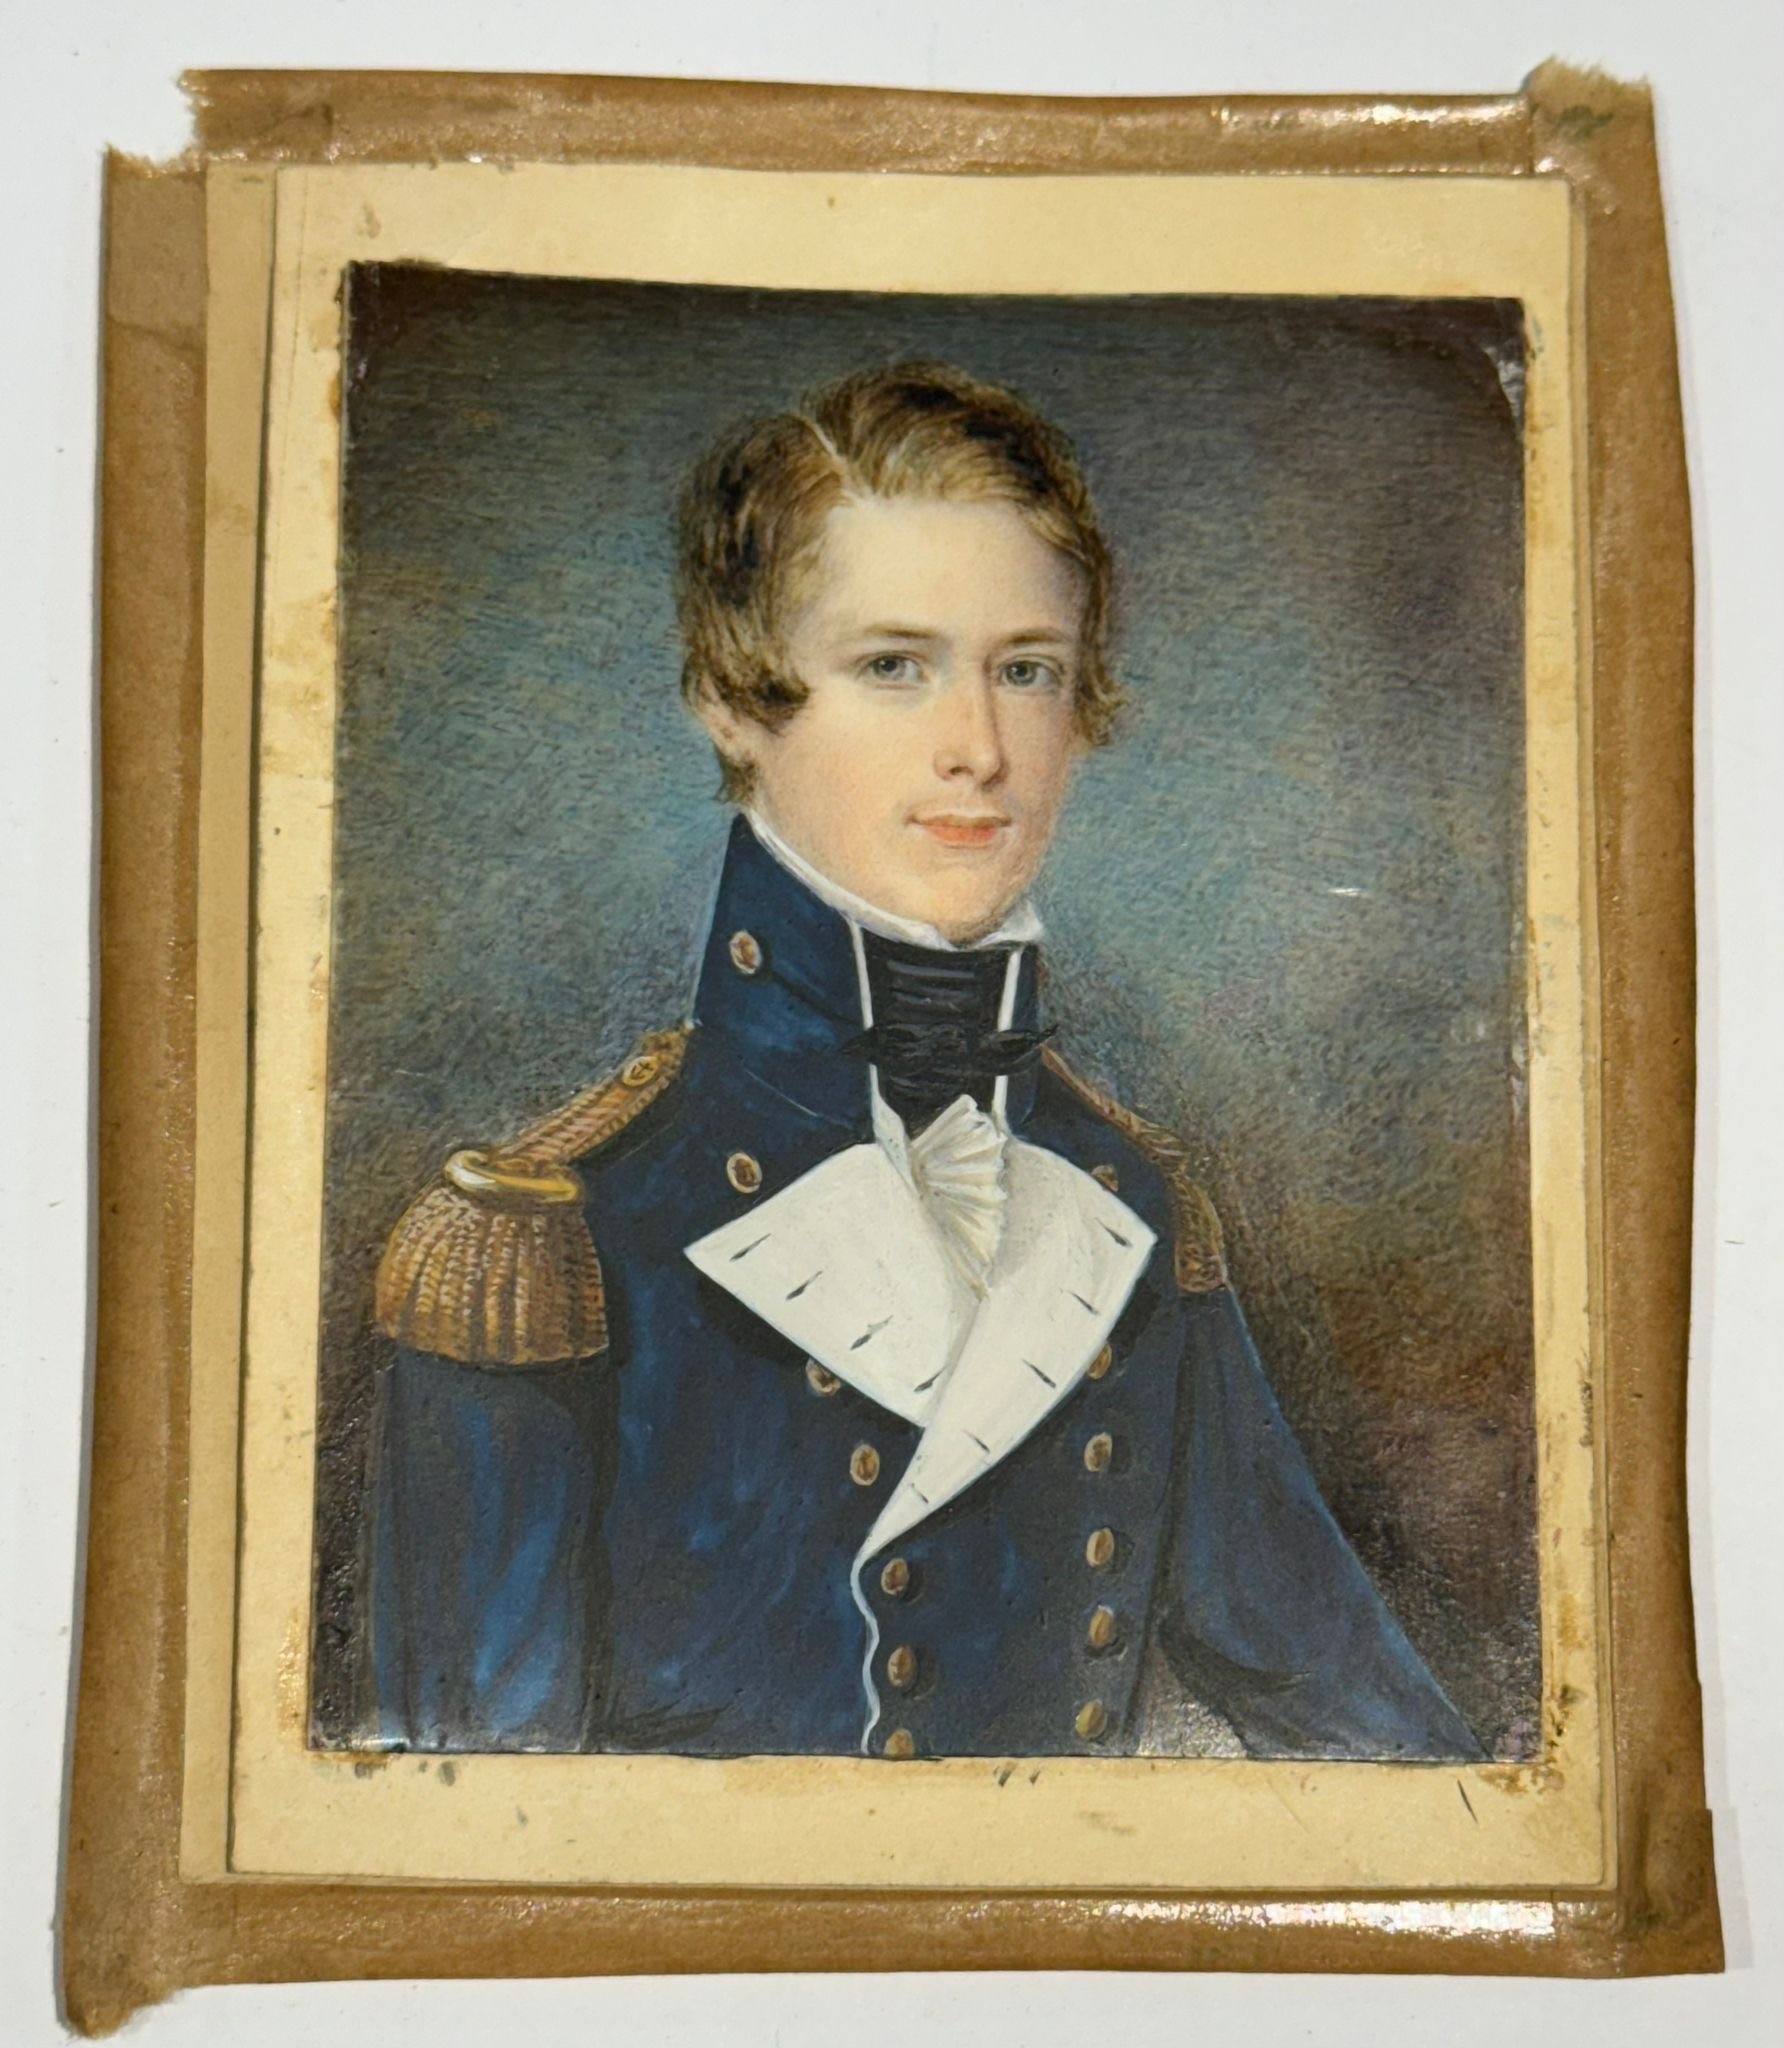 A Mid-19th century portrait miniature of a Naval Commodore, with brown hair with side parting,